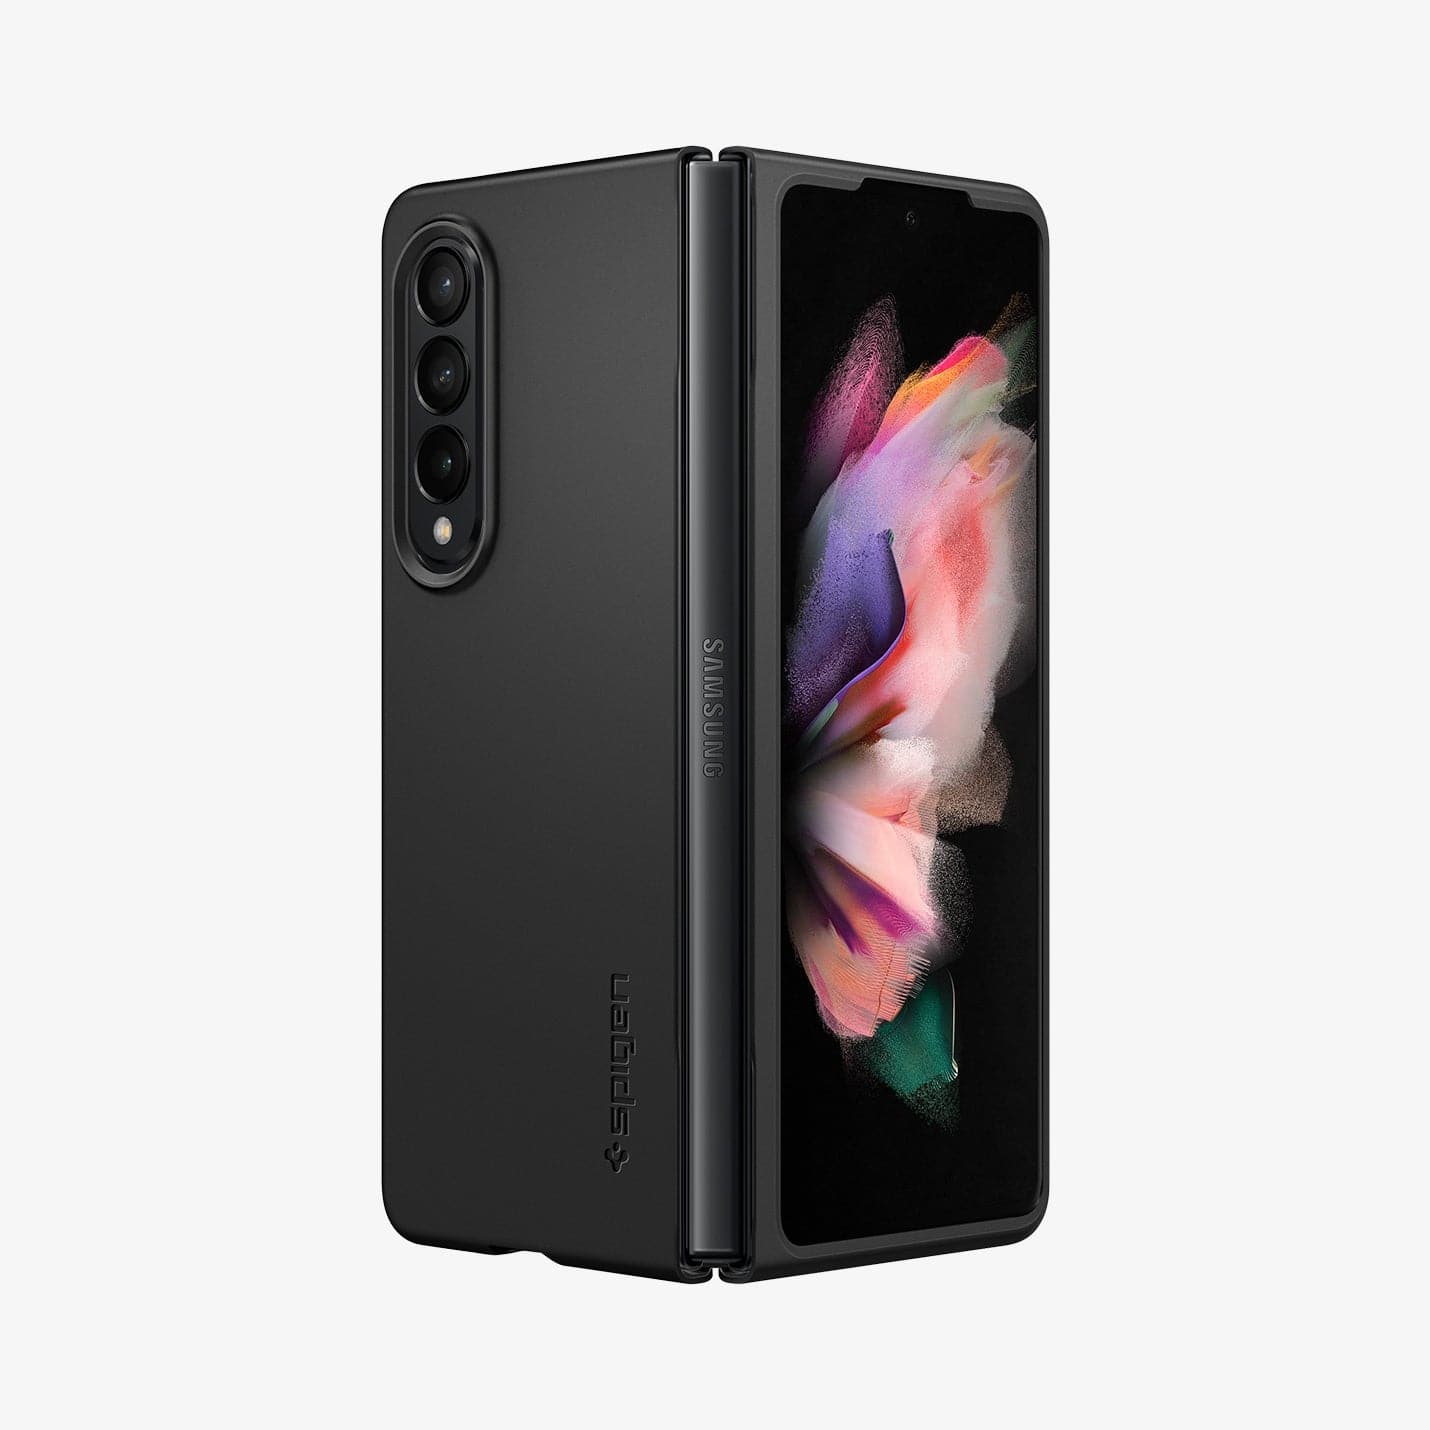 ACS03086 - Galaxy Z Fold 3 Case AirSkin in black showing the front, spine and back